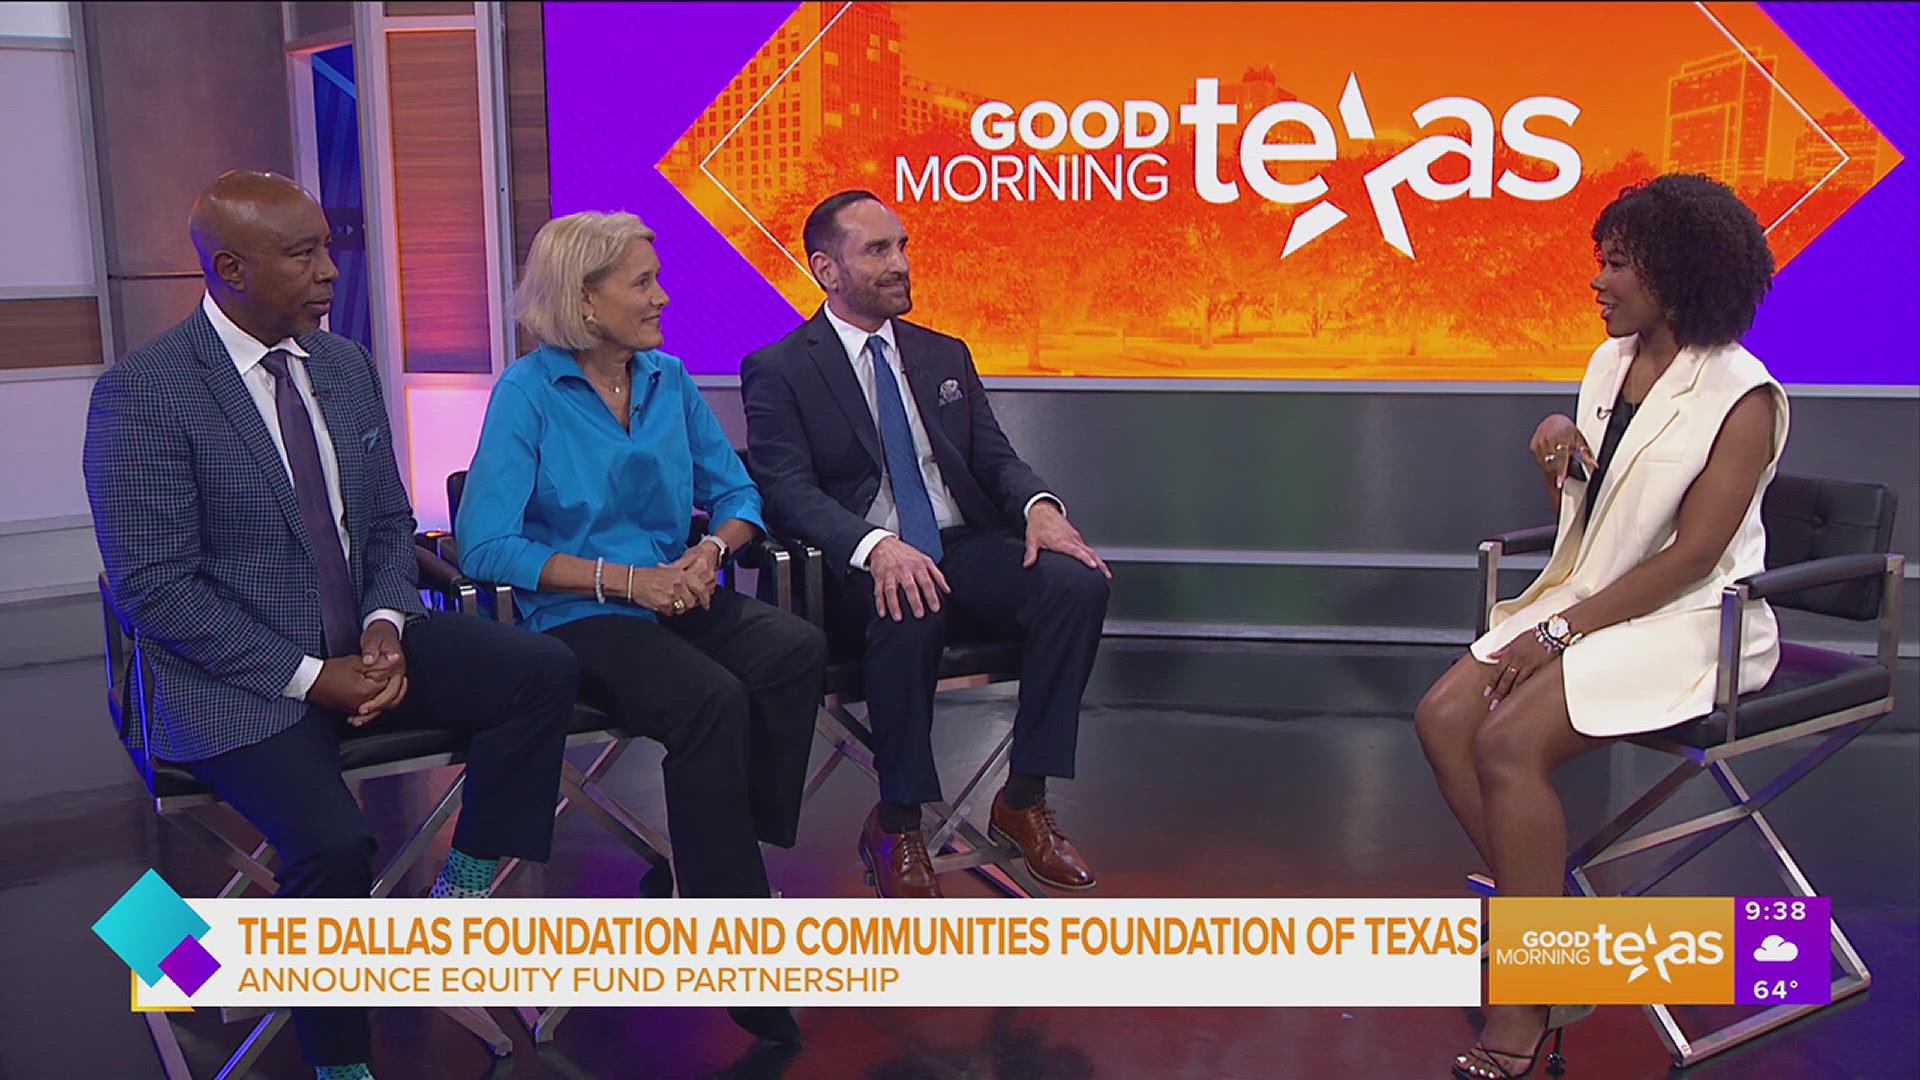 How you can get involved and support future efforts through The Dallas Foundation and Communities Foundation of Texas Equity Funds.